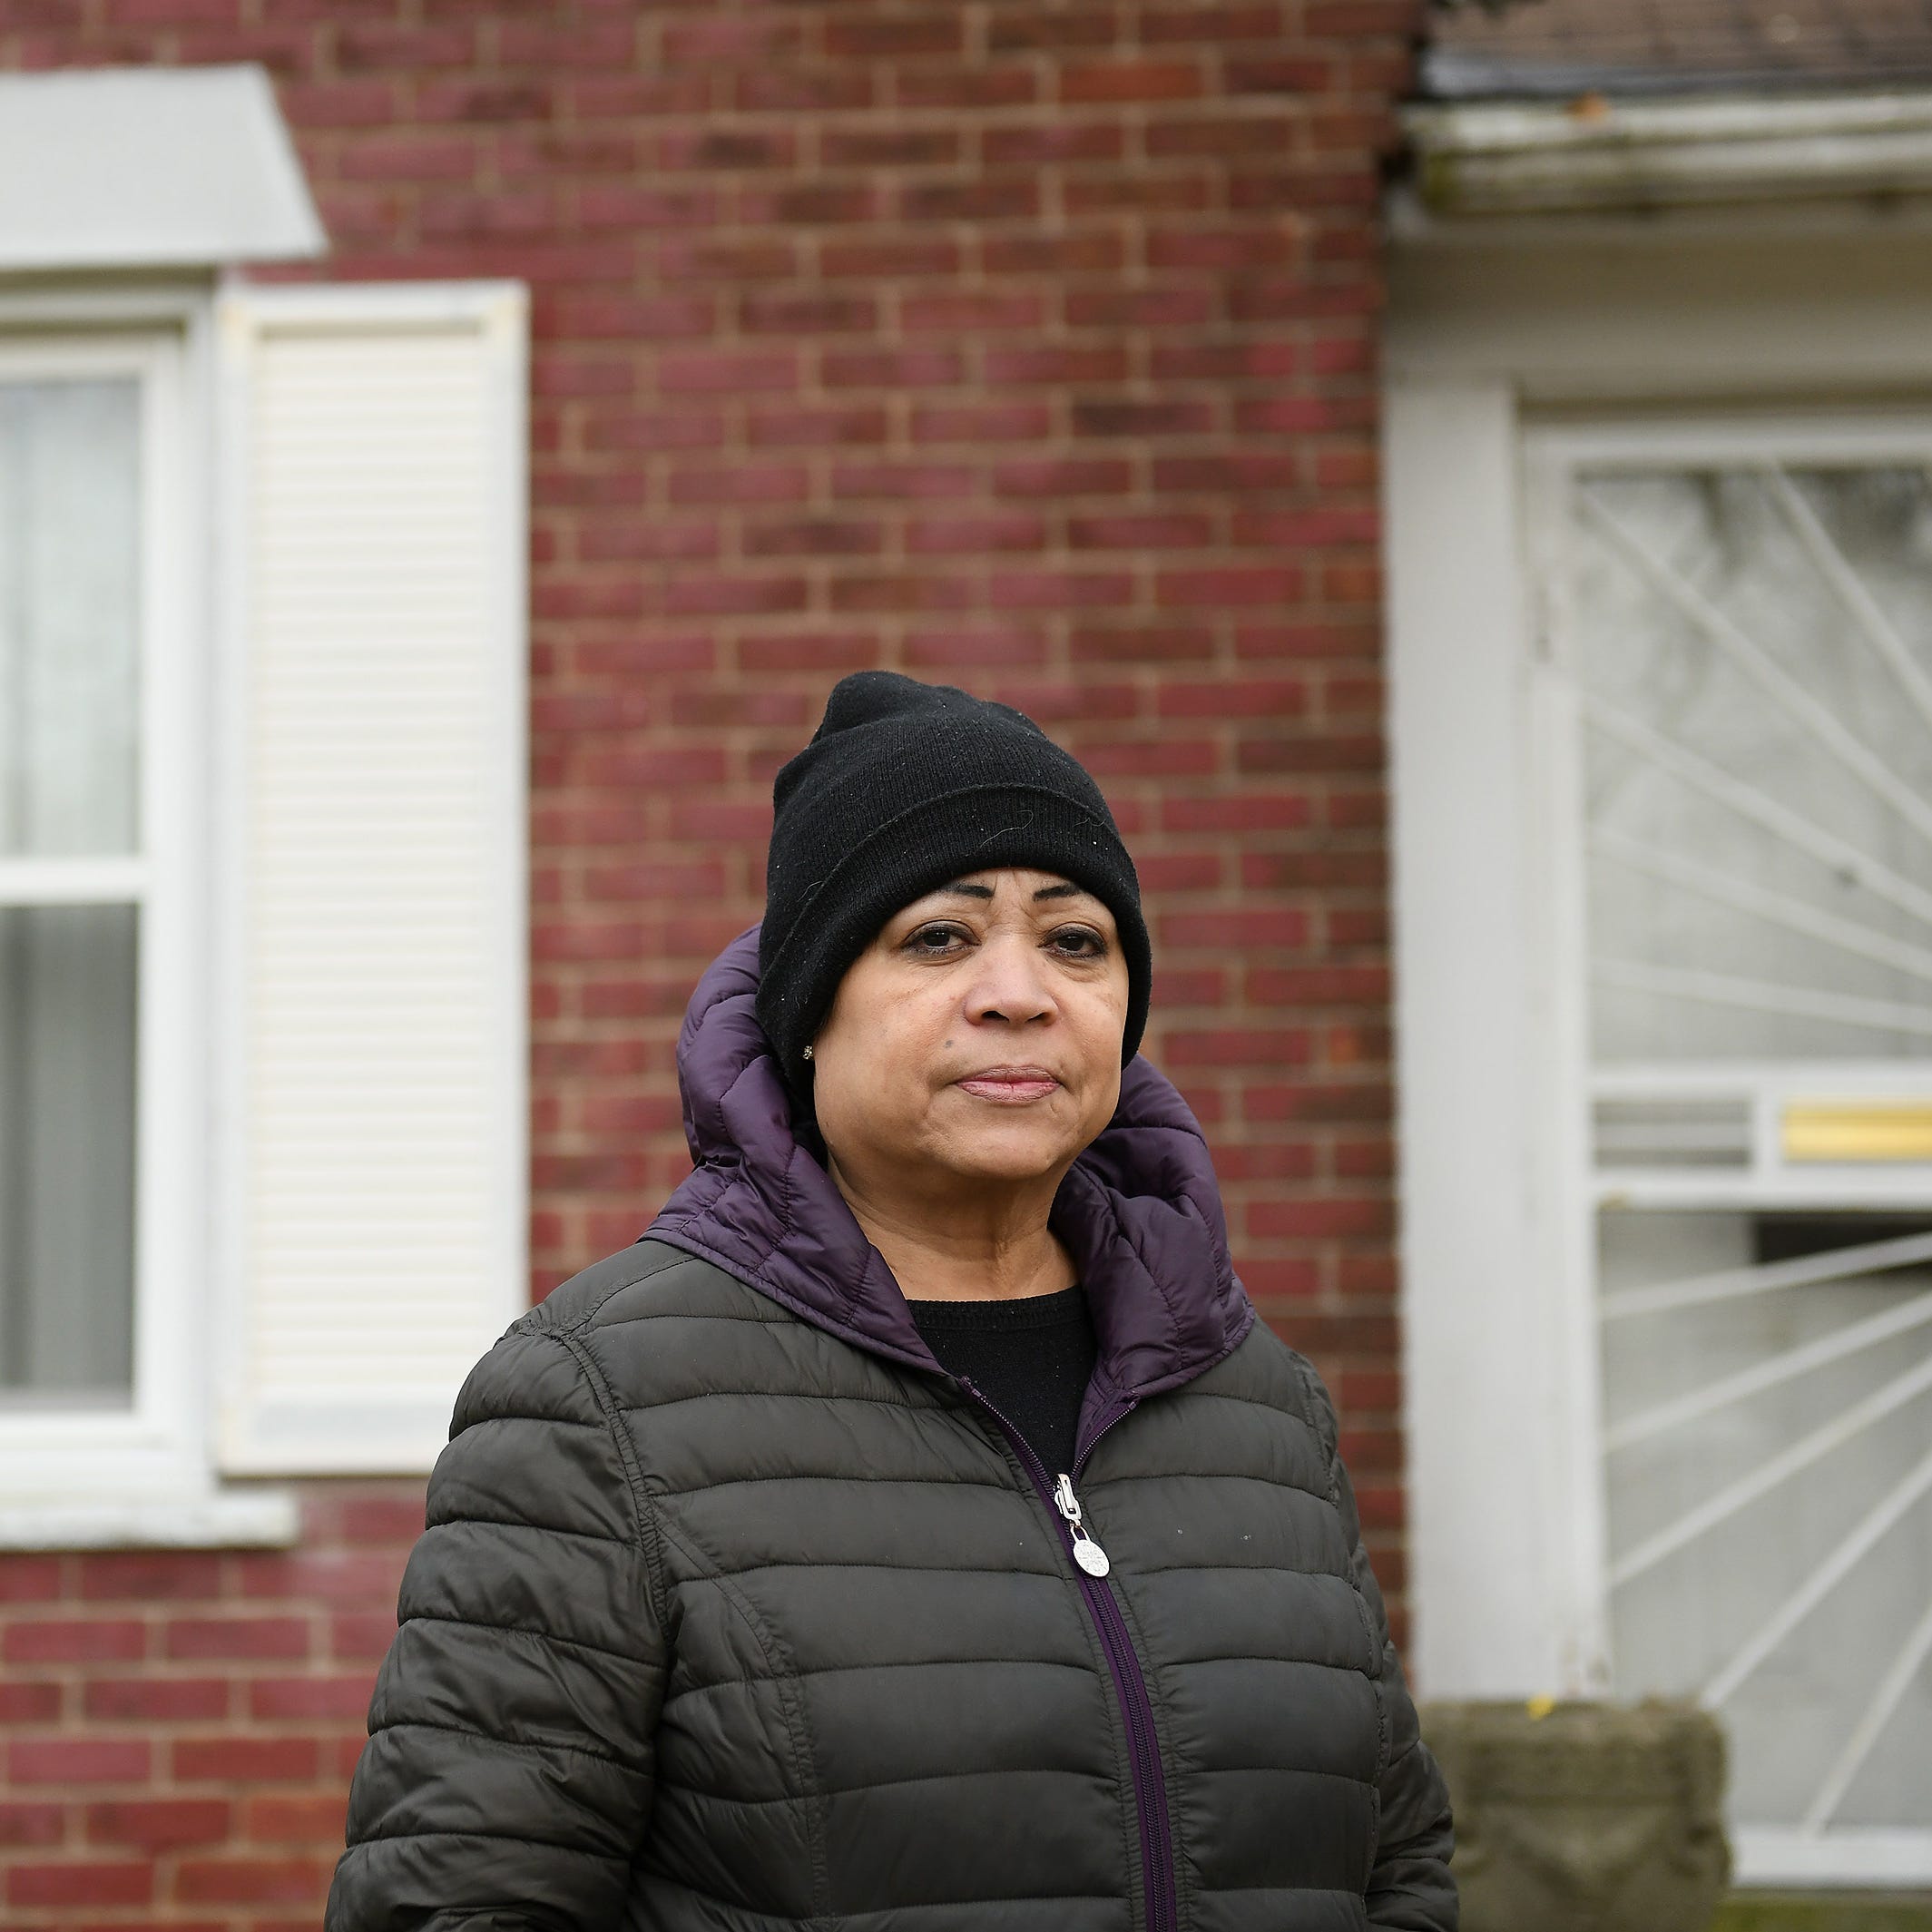 Anna Bolden, 55, talks about the challenges she faced regarding property taxes and assessment after buying this home at auction in 2011. She bought it for $4,800 and it was taxed that year as if it was worth $57,000.